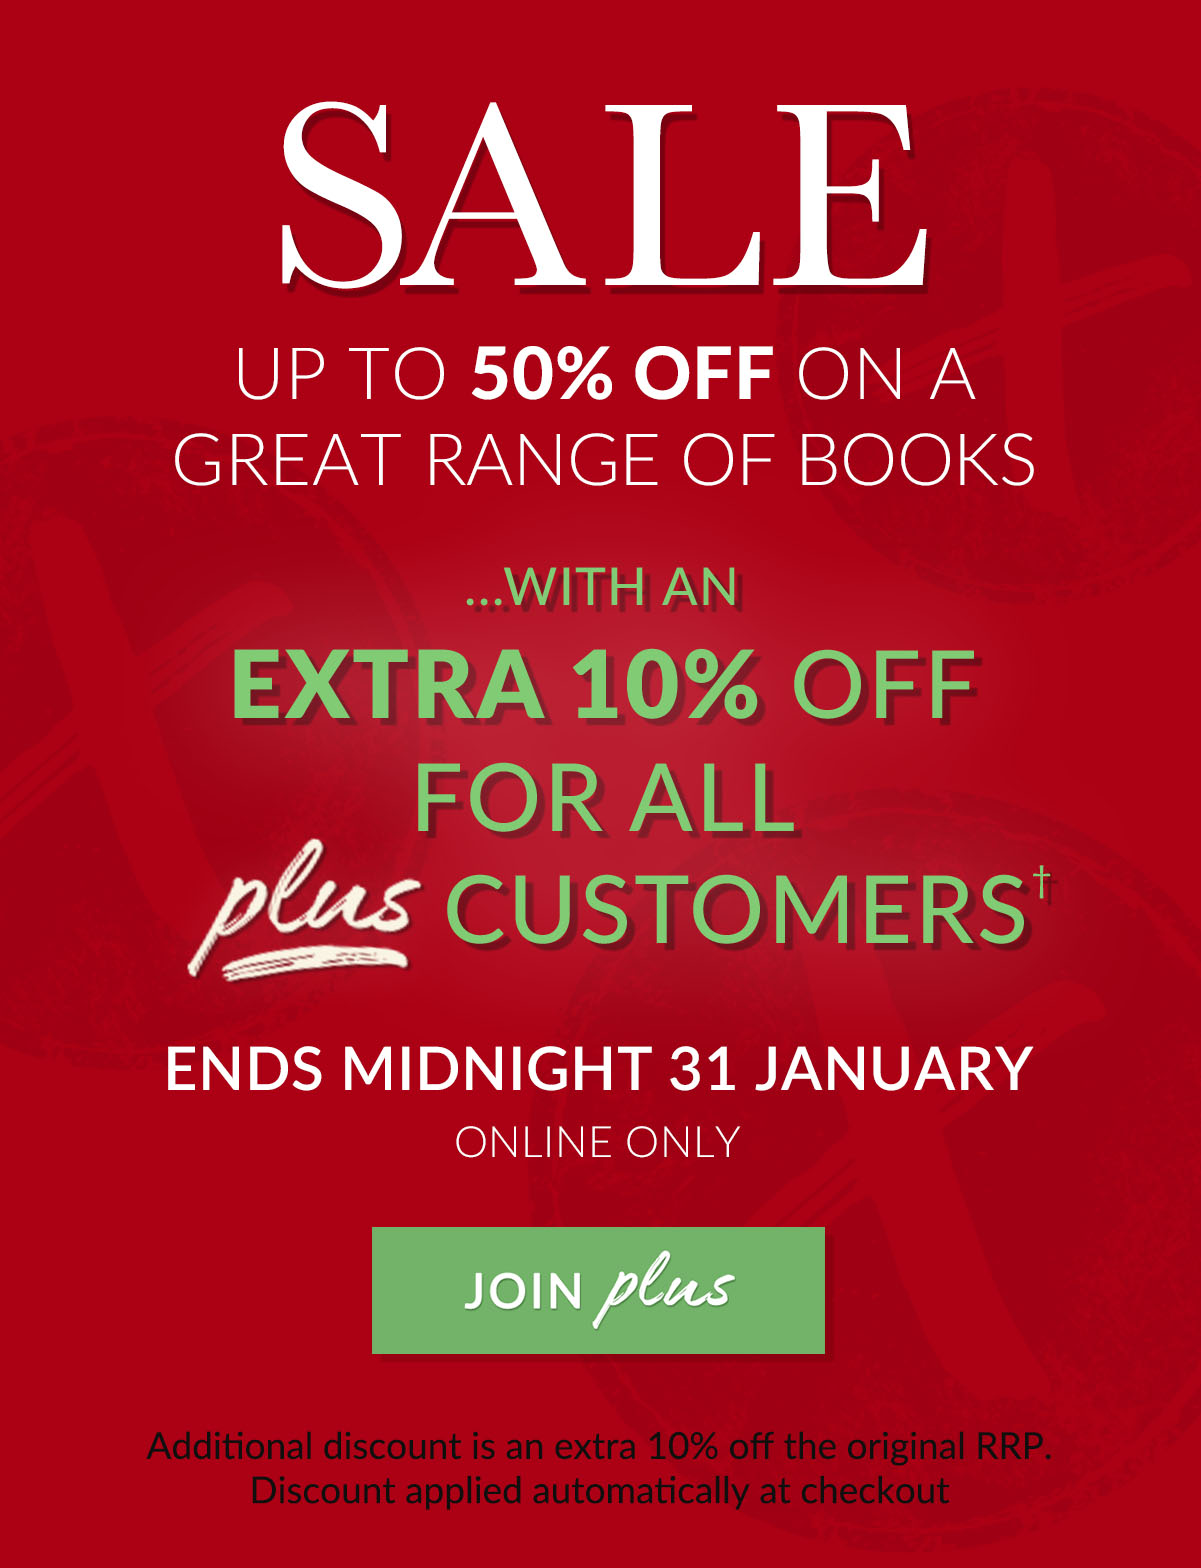 SALE UP TO 50% OFF ON A GREAT RANGE OF BOOKS ...WITH AN EXTRA 10% OFF FOR ALL PLUS CUSTOMERS | ENDS MIDNIGHT 31 JANUARY | ONLINE ONLY | JOIN PLUS | Additional discount is an extra 10% off the original RRP. Discount applied automatically at checkout SALE UP TO 50% OFF ON A GREAT RANGE OF BOOKS ..WITH AN EXTRA 10% OFF FOR ALL plus CUSTOMERS' ENDS MIDNIGHT 31 JANUARY INNINNe A% 